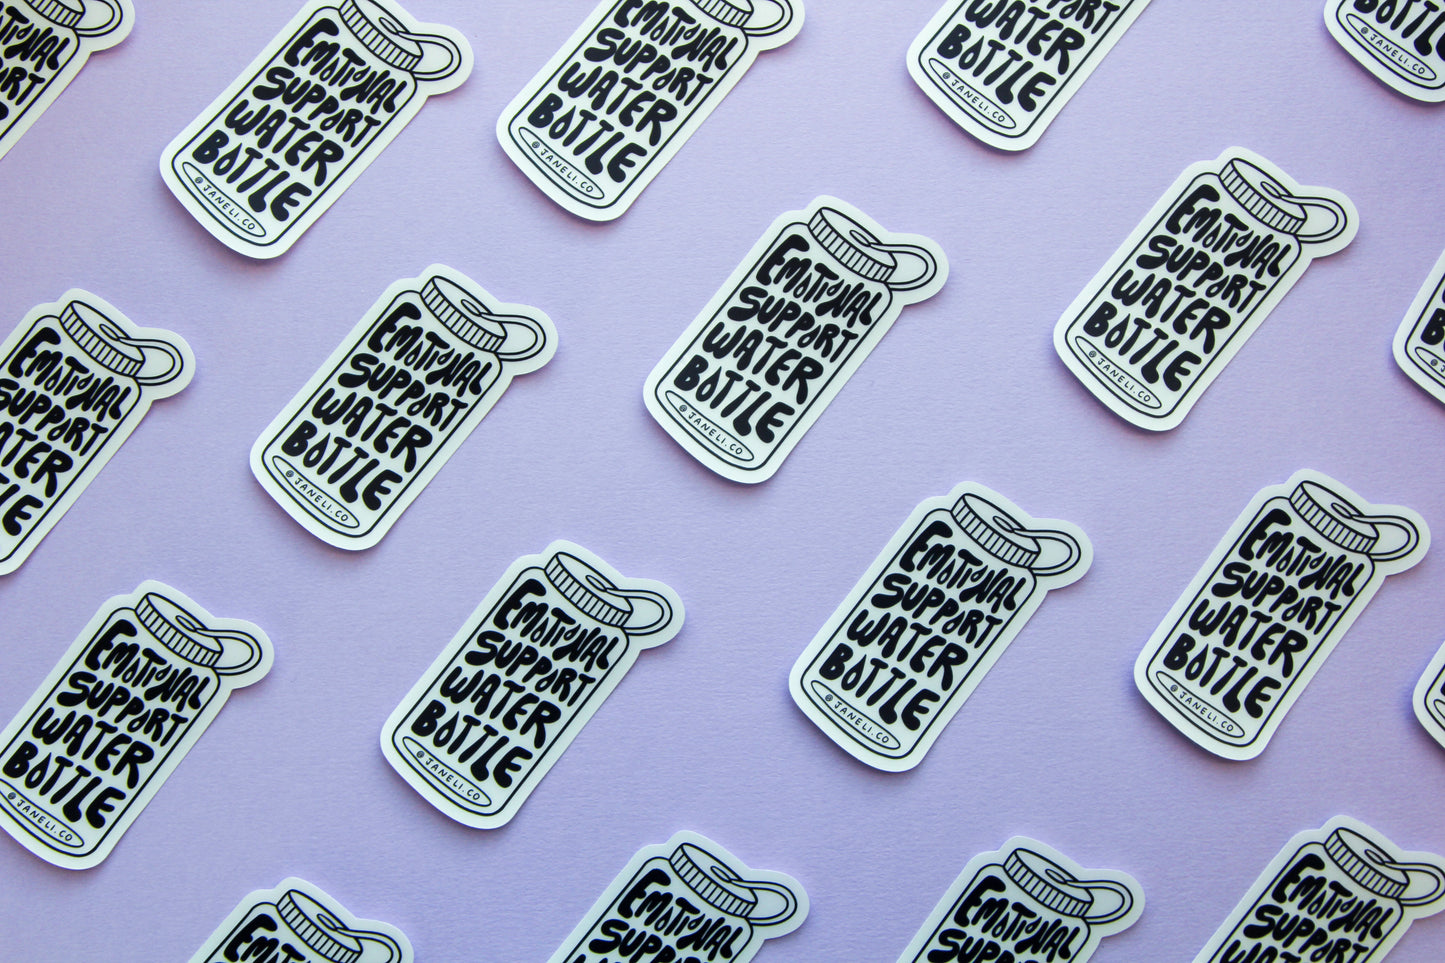 A grid of JaneLi.Co stickers that say "Emotional Support Water Bottle" in the shape of a water bottle over a lavender background.